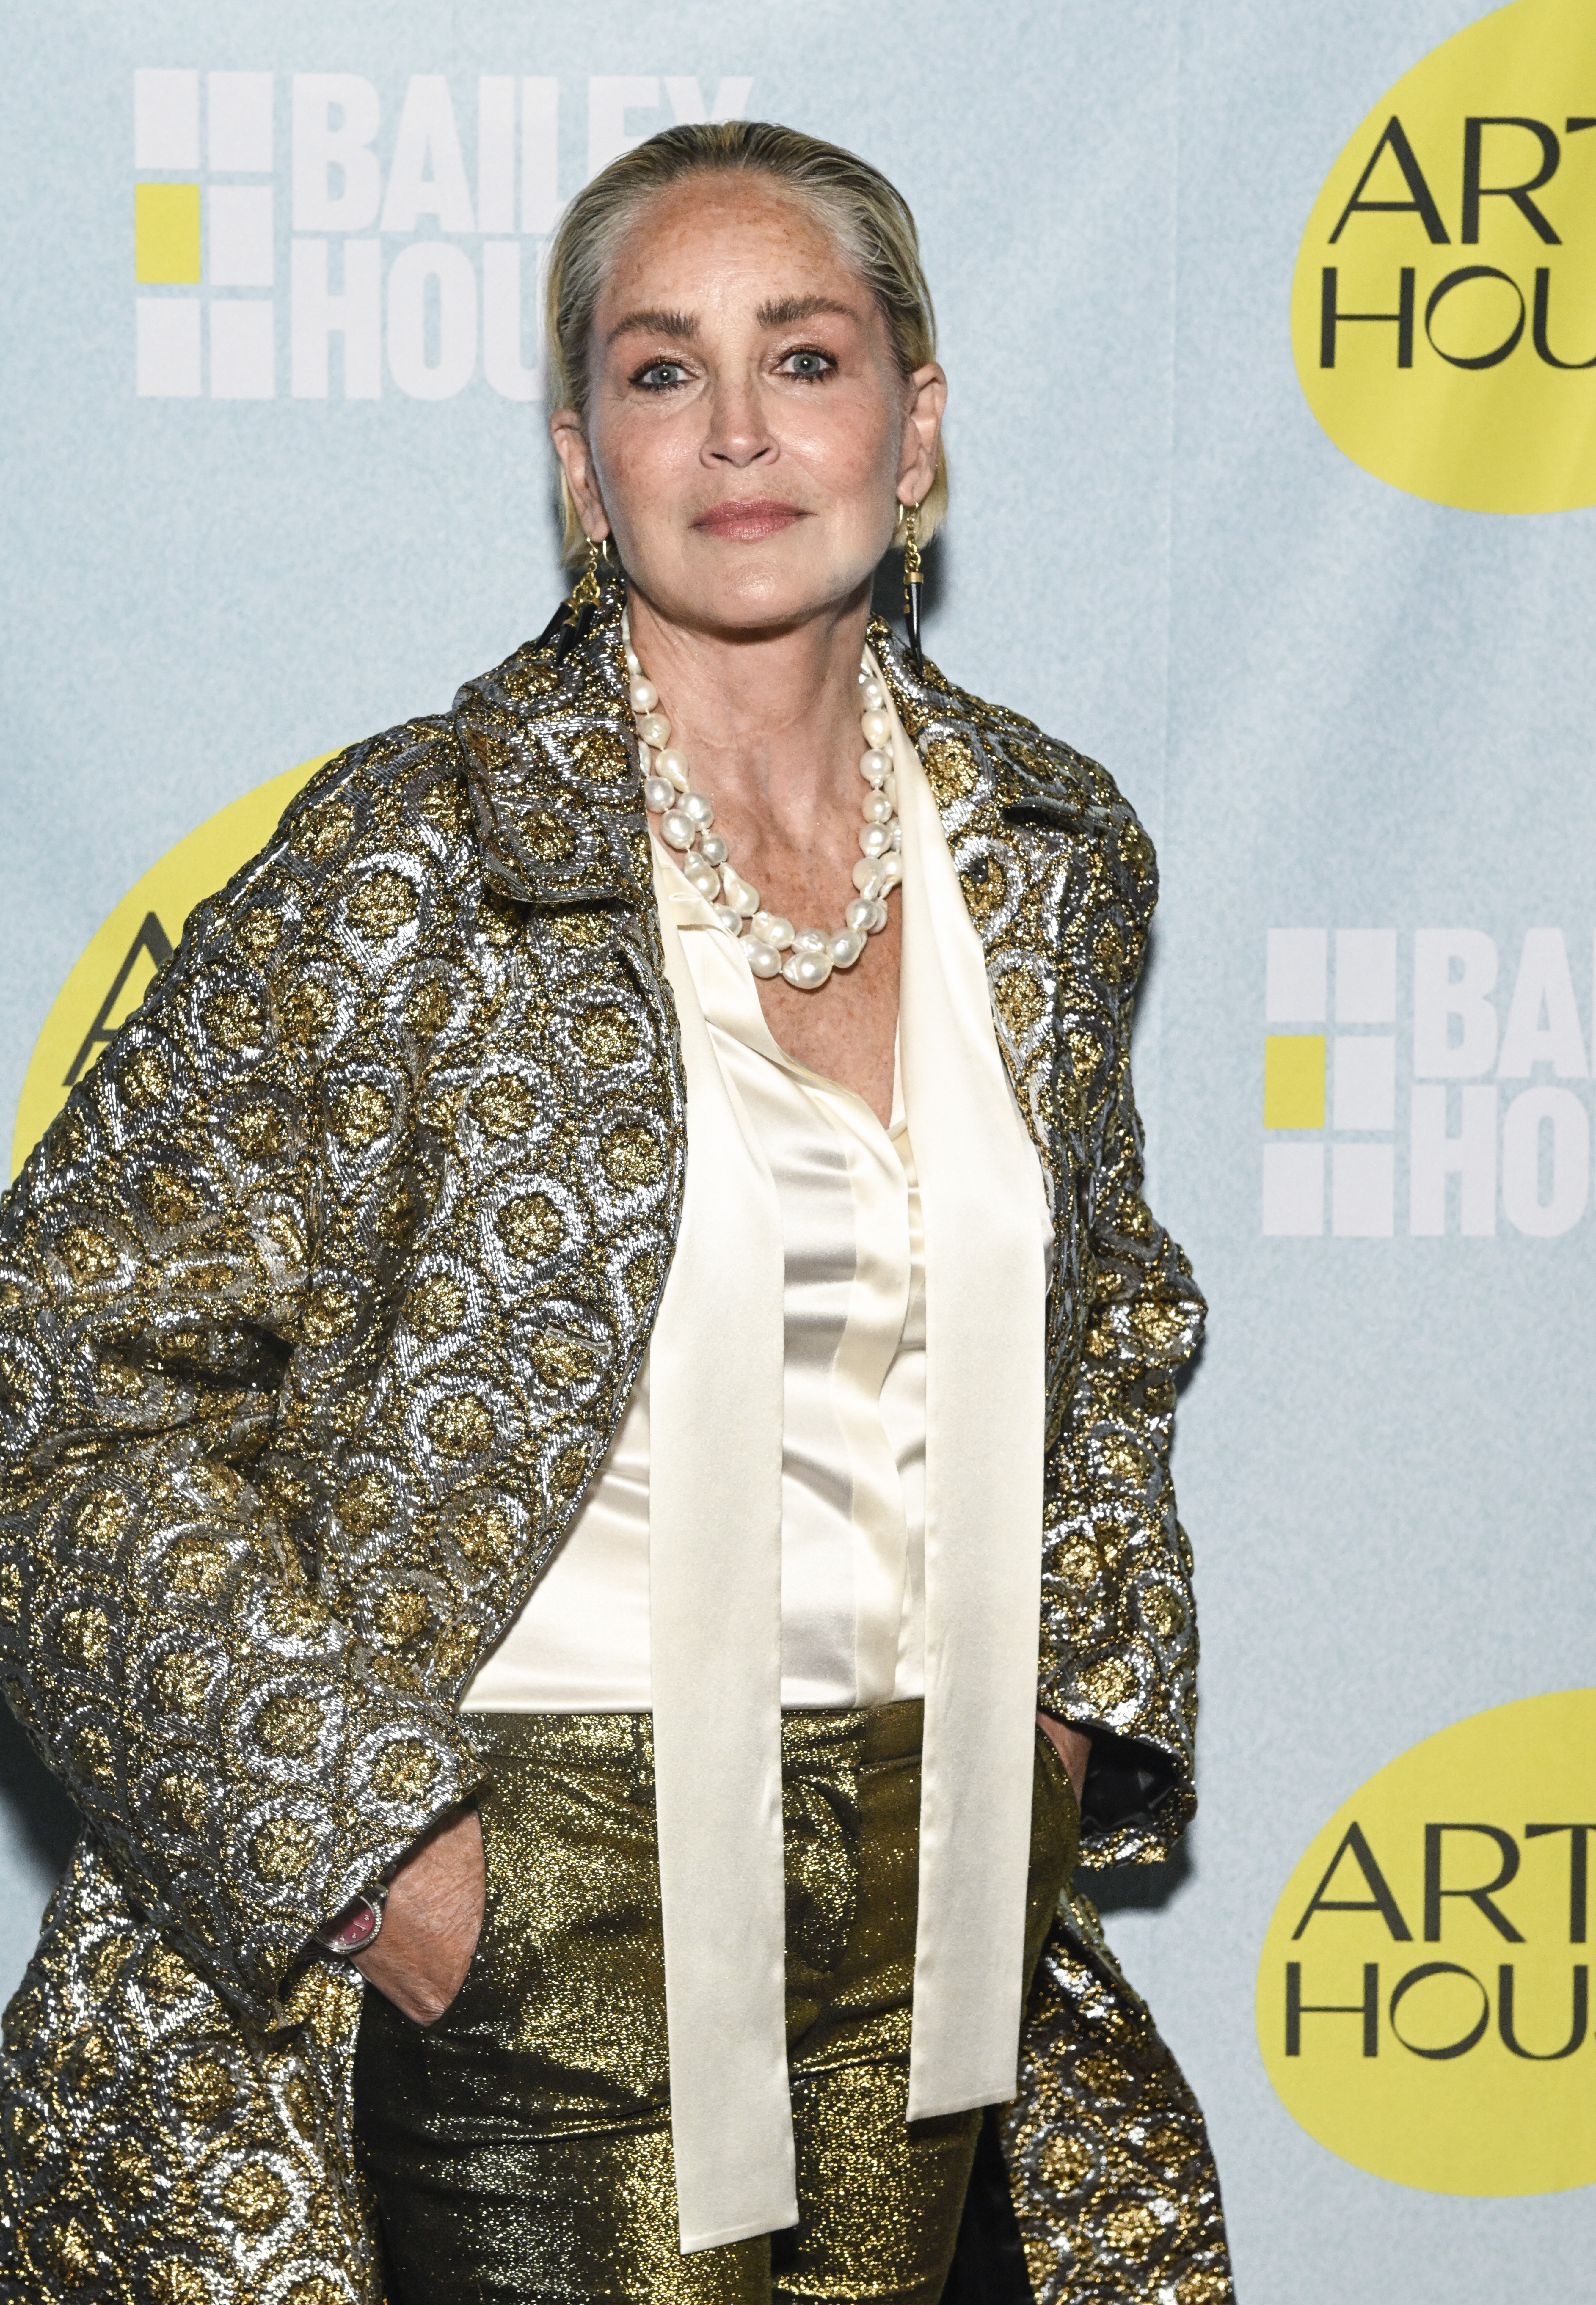 Sharon Stone attends the Bailey House's 2023 Art House benefit honoring Nan Goldin at Bowery Hotel Terrace, on June 14, 2023, in New York City. | Source: Getty Images